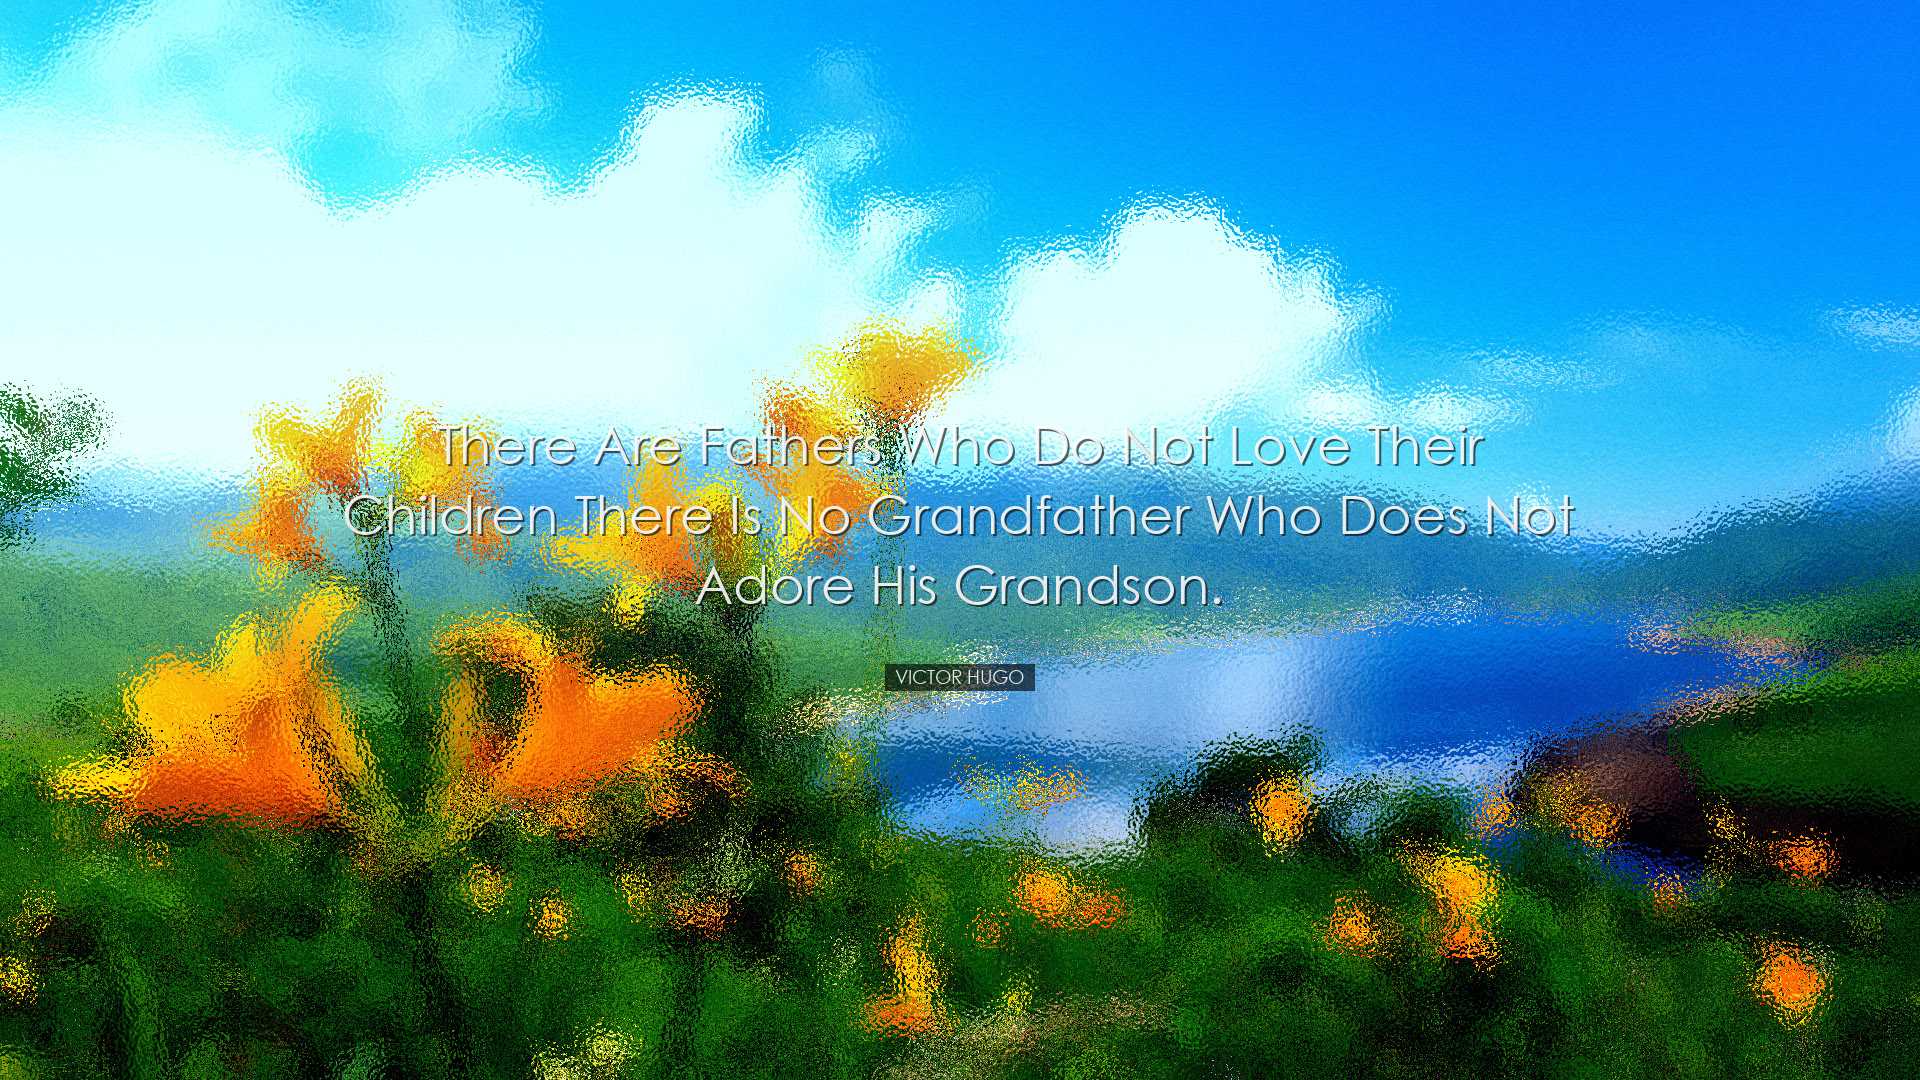 There are fathers who do not love their children there is no grand